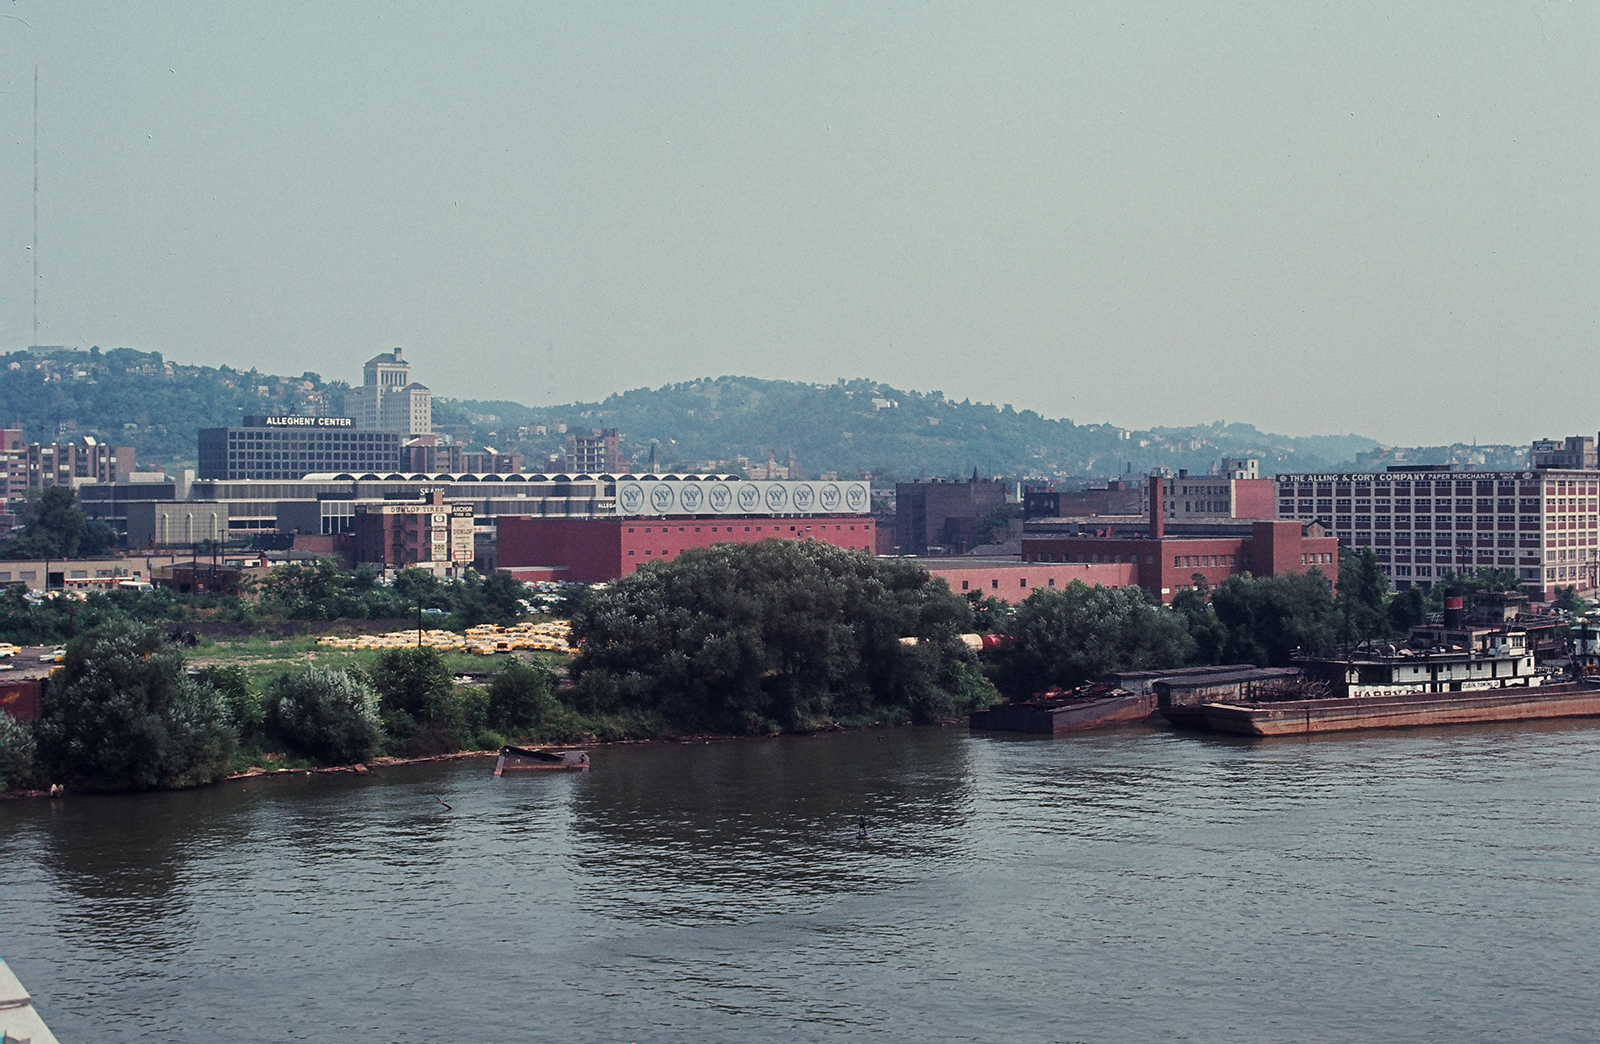 Pittsburgh buildings and factories along the riverbank.